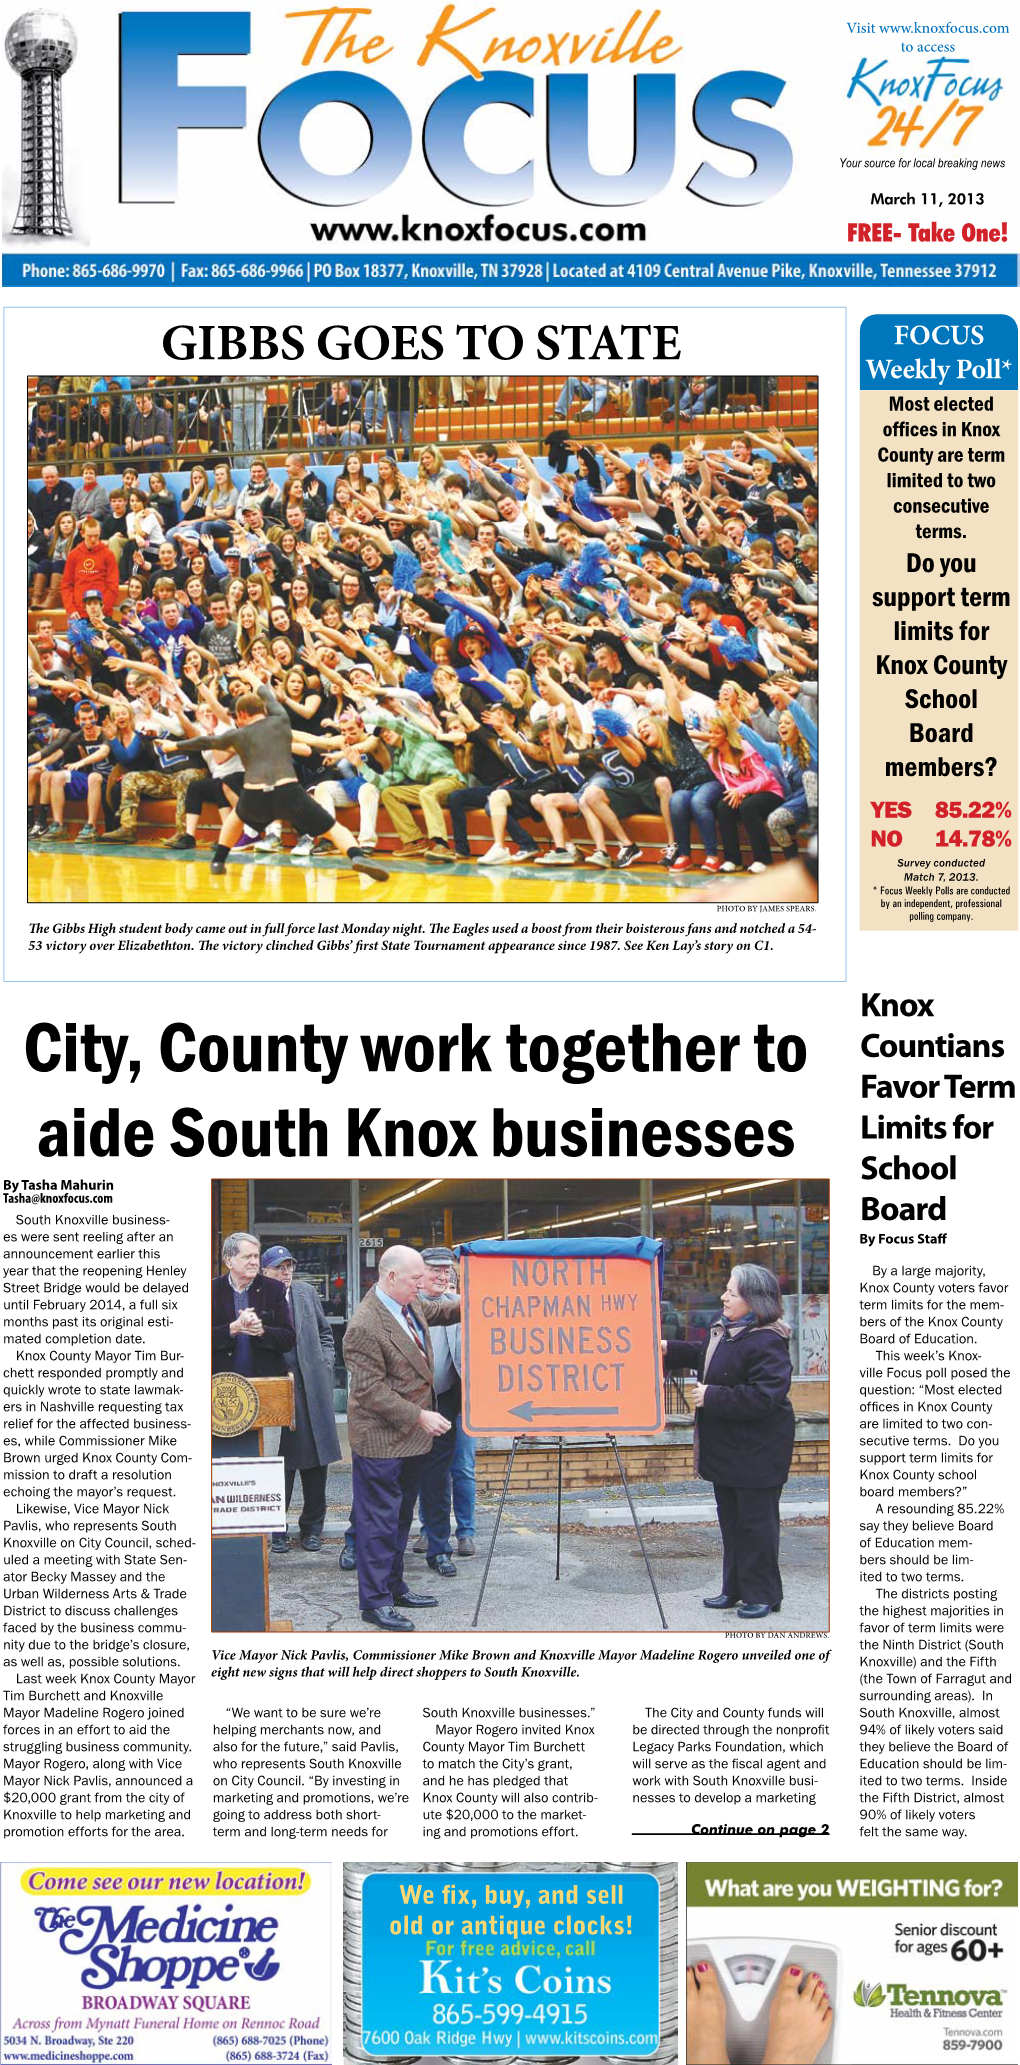 City, County Work Together to Aide South Knox Businesses